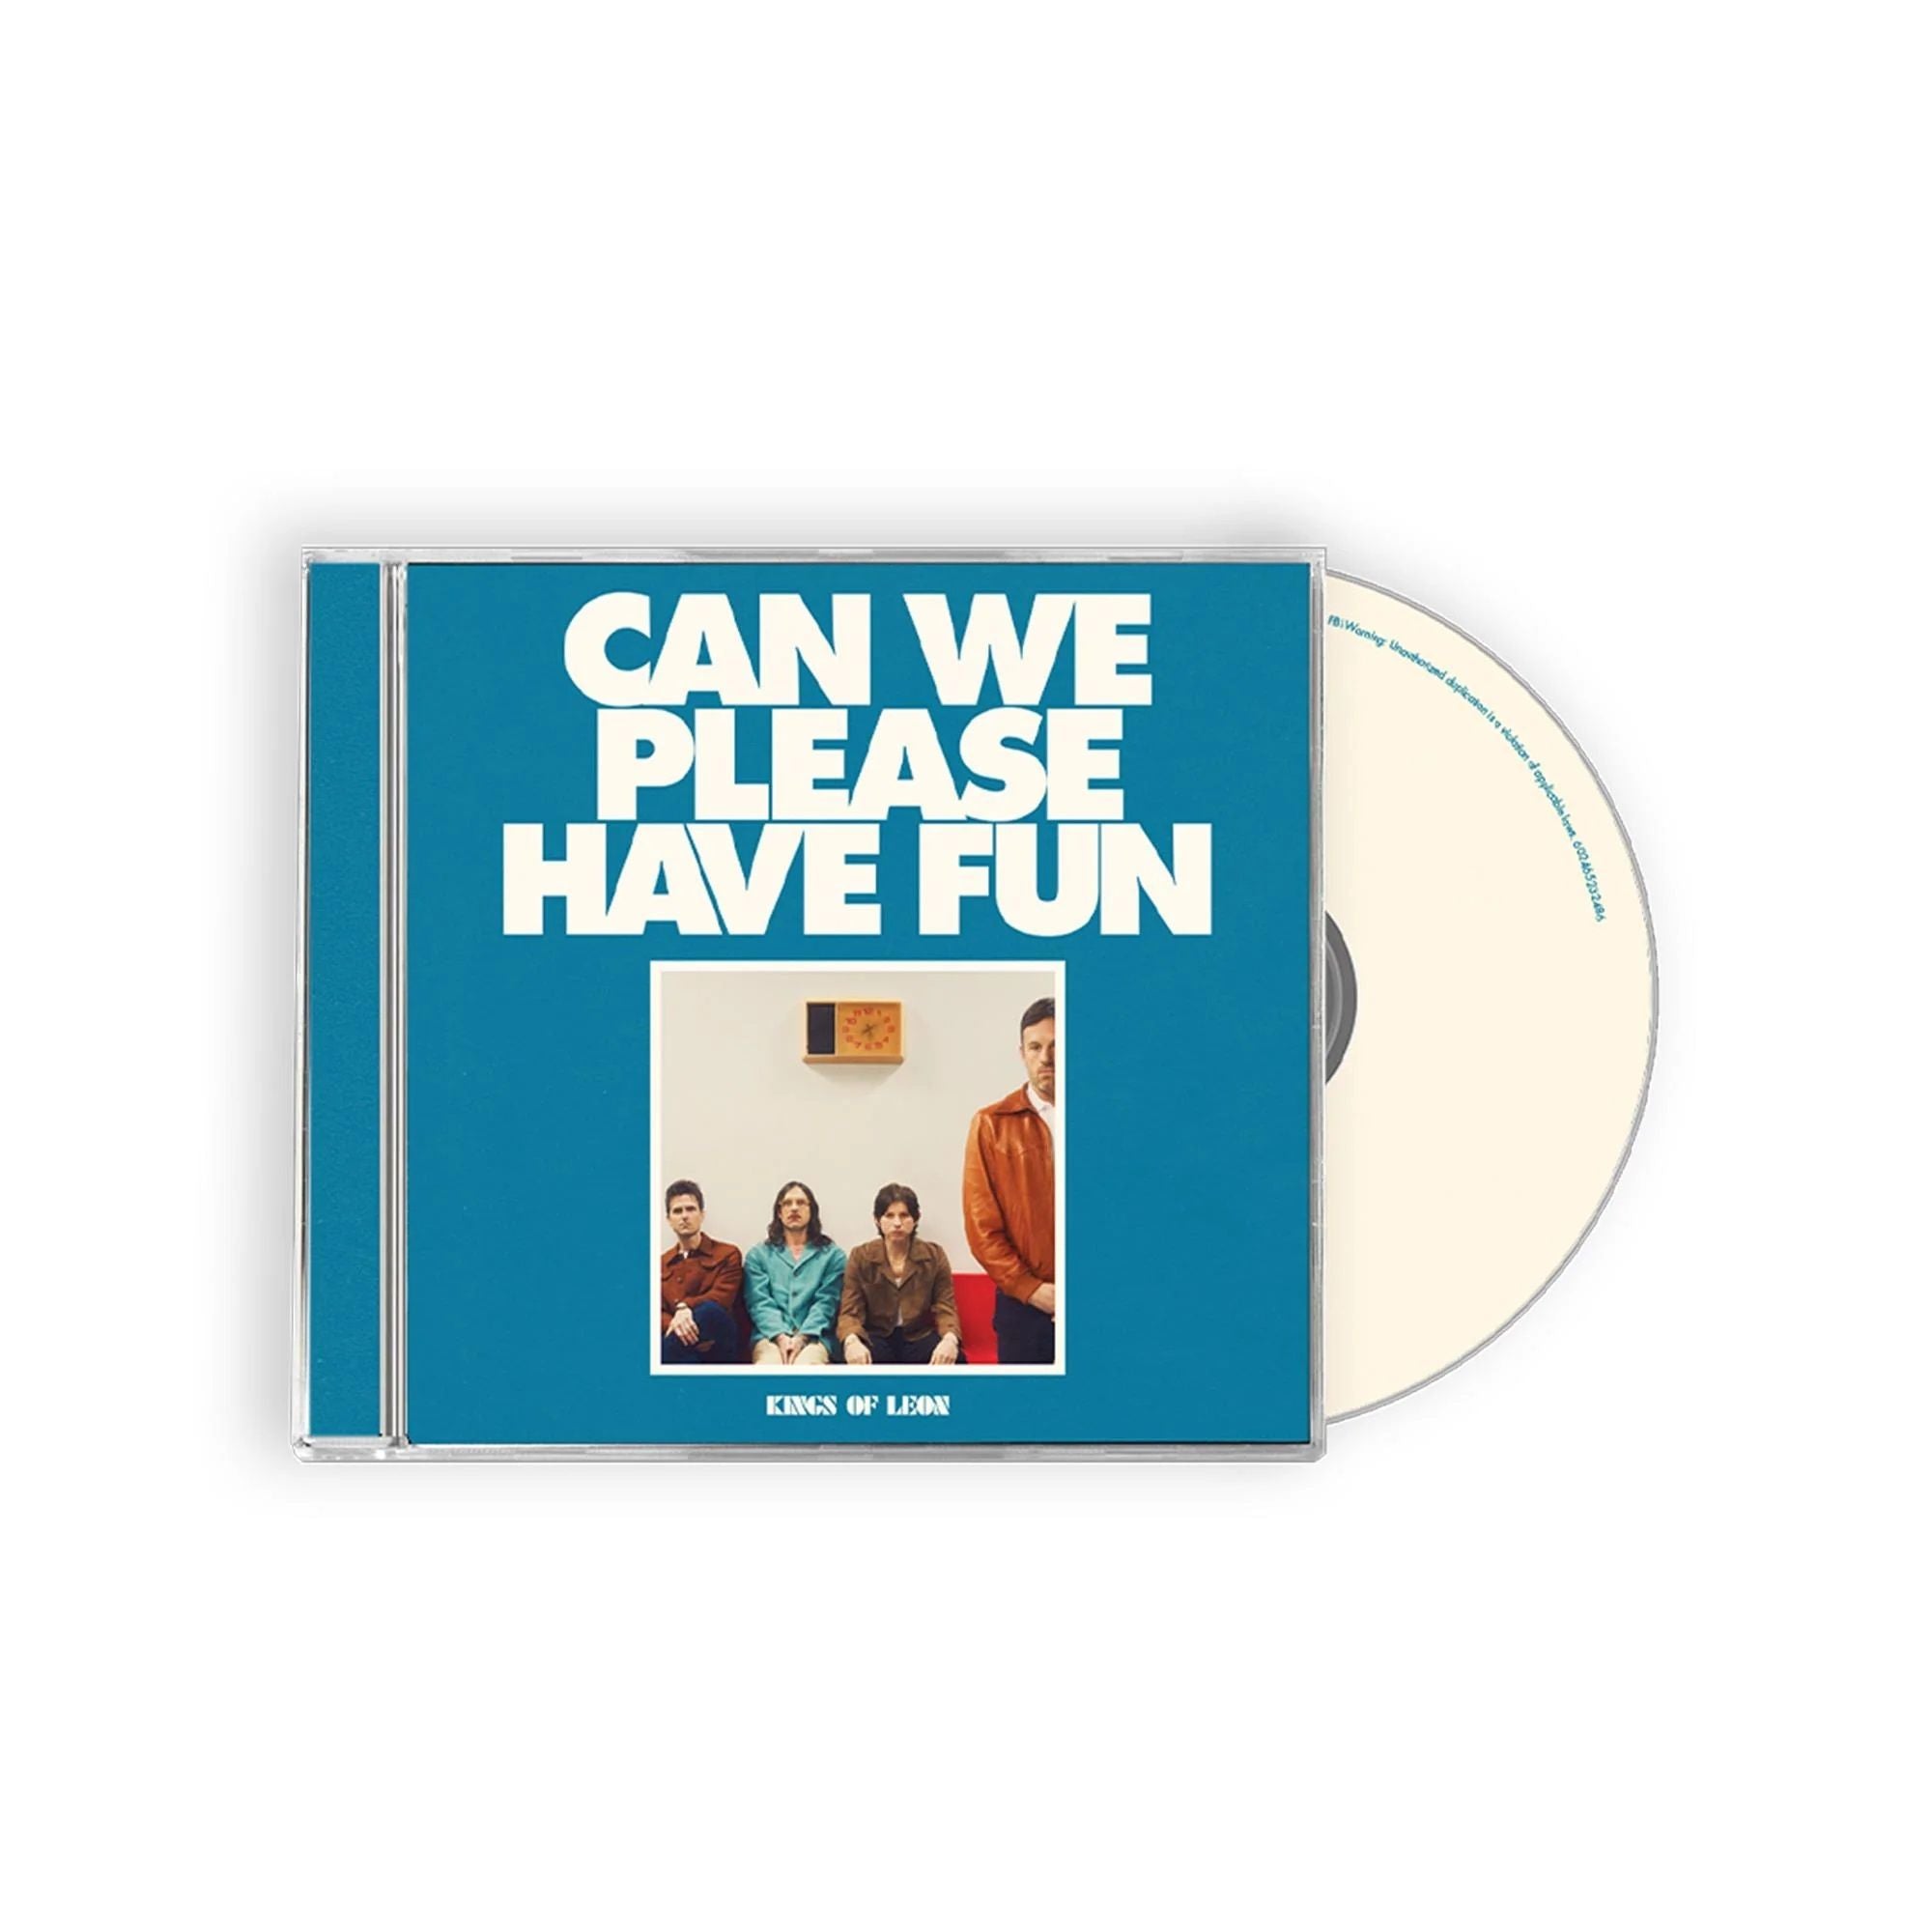 Kings Of Leon - Can We Please Have Fun - CD - New